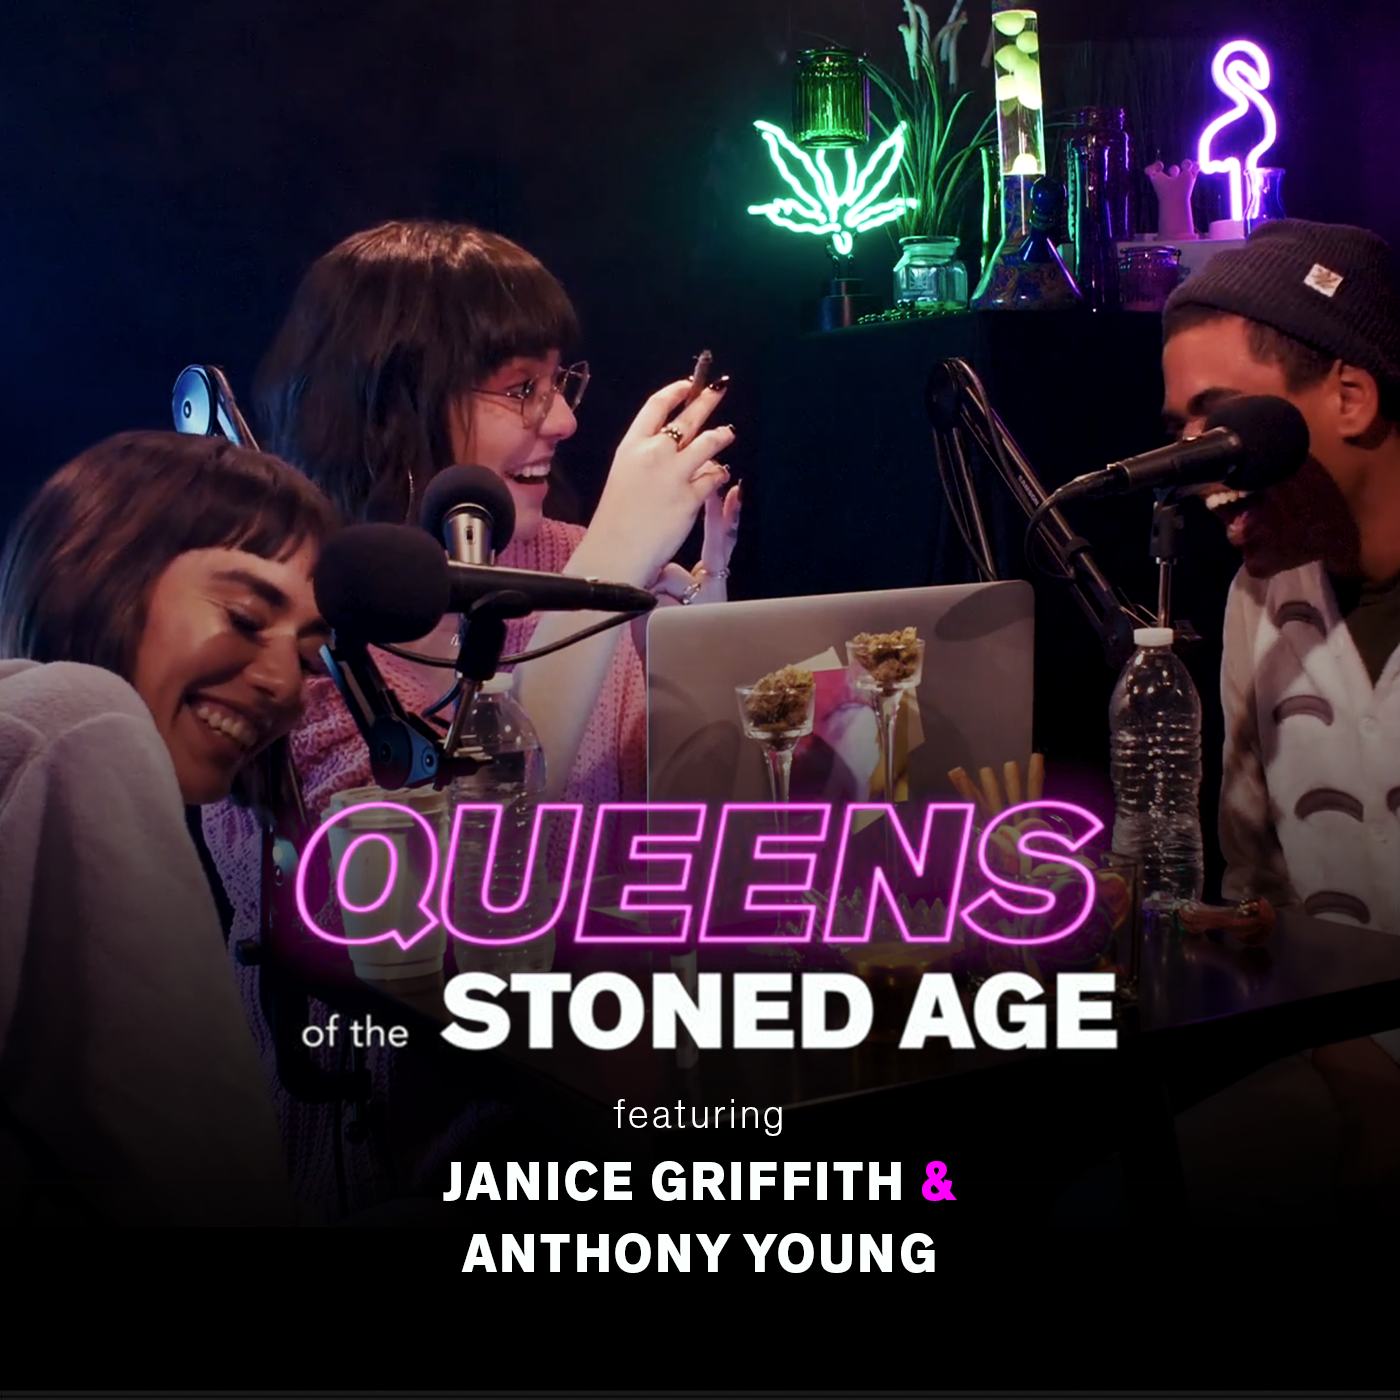 Adult Star Janice Griffith Dishes Out Relationship Advice on “Queens of the Stoned Age”